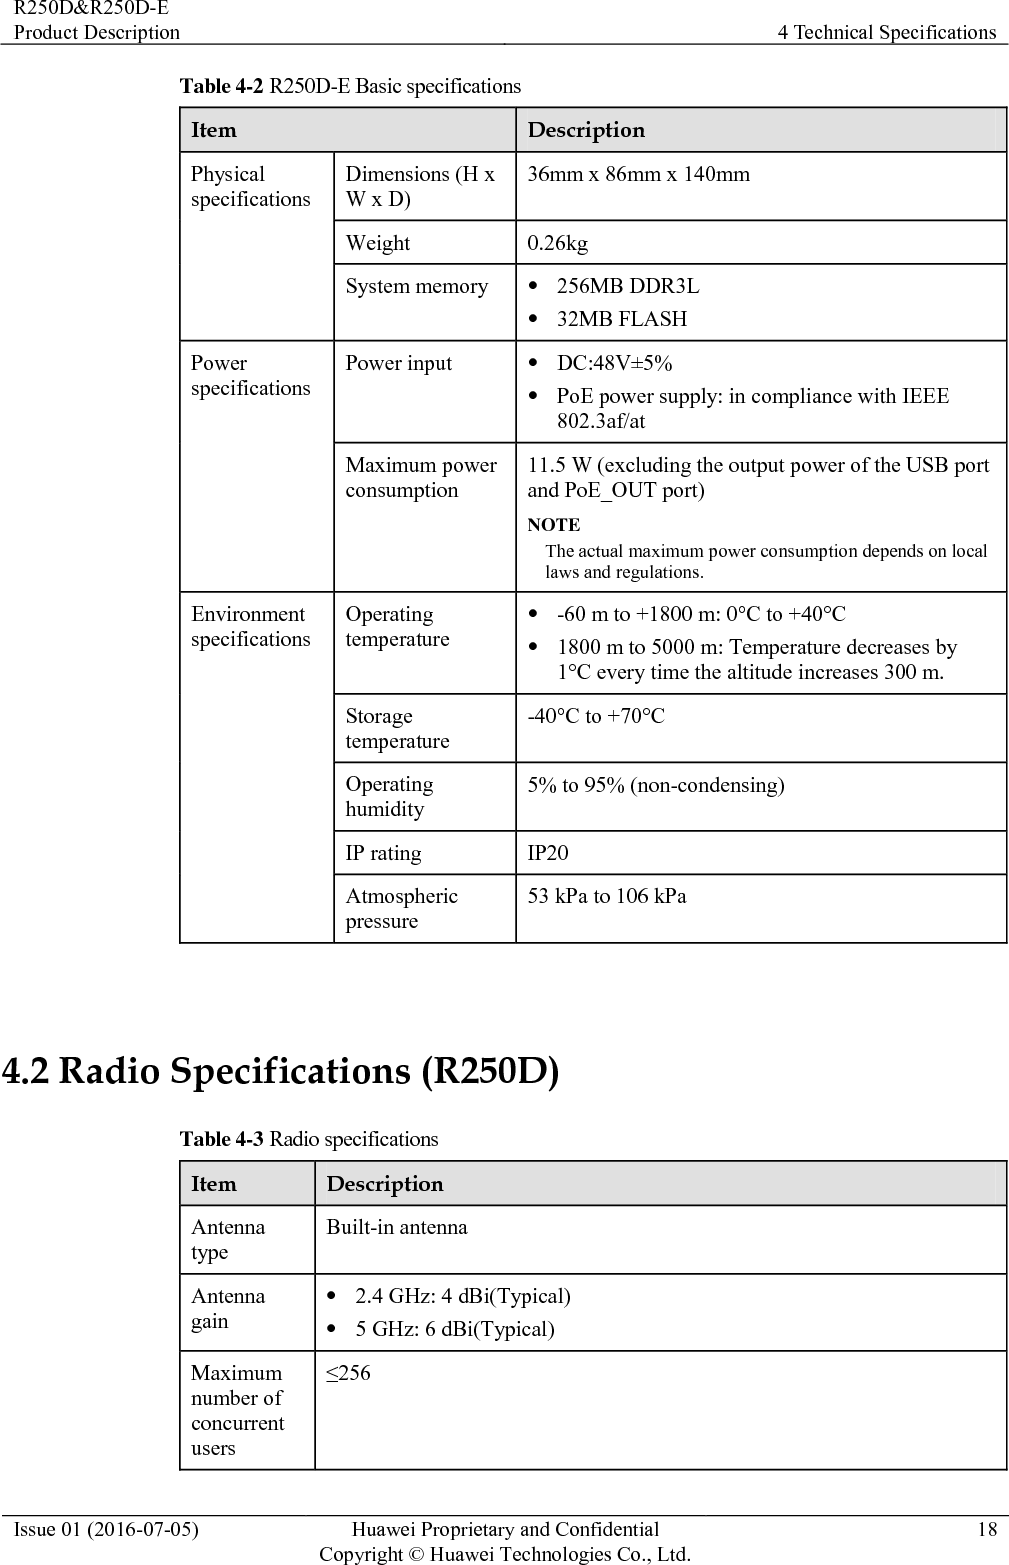 R250D&amp;R250D-E Product Description 4 Technical Specifications  Issue 01 (2016-07-05) Huawei Proprietary and Confidential                                     Copyright © Huawei Technologies Co., Ltd. 19  Item Description Maximum number of VAPs for each radio 16 Maximum transmit power  2.4 GHz: 21 dBm (combined power)  5 GHz: 20 dBm (combined power) NOTE The actual transmit power depends on local laws and regulations. You can adjust the transmit power from the maximum transmit power to 1 dBm, with a step of 1 dB. Maximum number of non-overlapping channels 2.4 GHz 802.11b/g  20 MHz: 3 802.11n  20 MHz: 3  40 MHz: 1 5 GHz  802.11a − 20 MHz: 13  802.11n − 20 MHz: 13 − 40 MHz: 6  802.11ac − 20 MHz: 13 − 40 MHz: 6 − 80 MHz: 3 NOTE The table uses the number of non-overlapping channels supported by China as an example. The number of non-overlapping channels varies in different countries. For details, see the Country Codes &amp; Channels Compliance. Channel rate  802.11b: 1, 2, 5.5, and 11 Mbit/s  802.11a/g: 6, 9, 12, 18, 24, 36, 48, and 54 Mbit/s  802.11n: 6.5 to 300 Mbit/s  802.11ac: 6.5 to 867 Mbit/s Receiver sensitivity (Typical values) 2.4 GHz 802.11b  -99 dBm @ 1 Mbit/s  -97 dBm @ 2 Mbit/s  -95 dBm @ 5.5 Mbit/s  -92 dBm @ 11 Mbit/s 2.4 GHz 802.11g  -94 dBm @ 6 Mbit/s  -93 dBm @ 9 Mbit/s  -90 dBm @ 12 Mbit/s  -89 dBm @ 18 Mbit/s  -85 dBm @ 24 Mbit/s  -84 dBm @ 2.4 GHz 802.11n (HT20)  -93 dBm @ MCS0  -89 dBm @ MCS1  -87 dBm @ MCS2  -85 dBm @ MCS3  -82 dBm @ MCS4  -78 dBm @ 2.4 GHz 802.11n(HT40)  -91 dBm @ MCS0  -88 dBm @ MCS1  -85 dBm @ MCS2  -83 dBm @ MCS3  -80 dBm @ MCS4  -76 dBm @ 